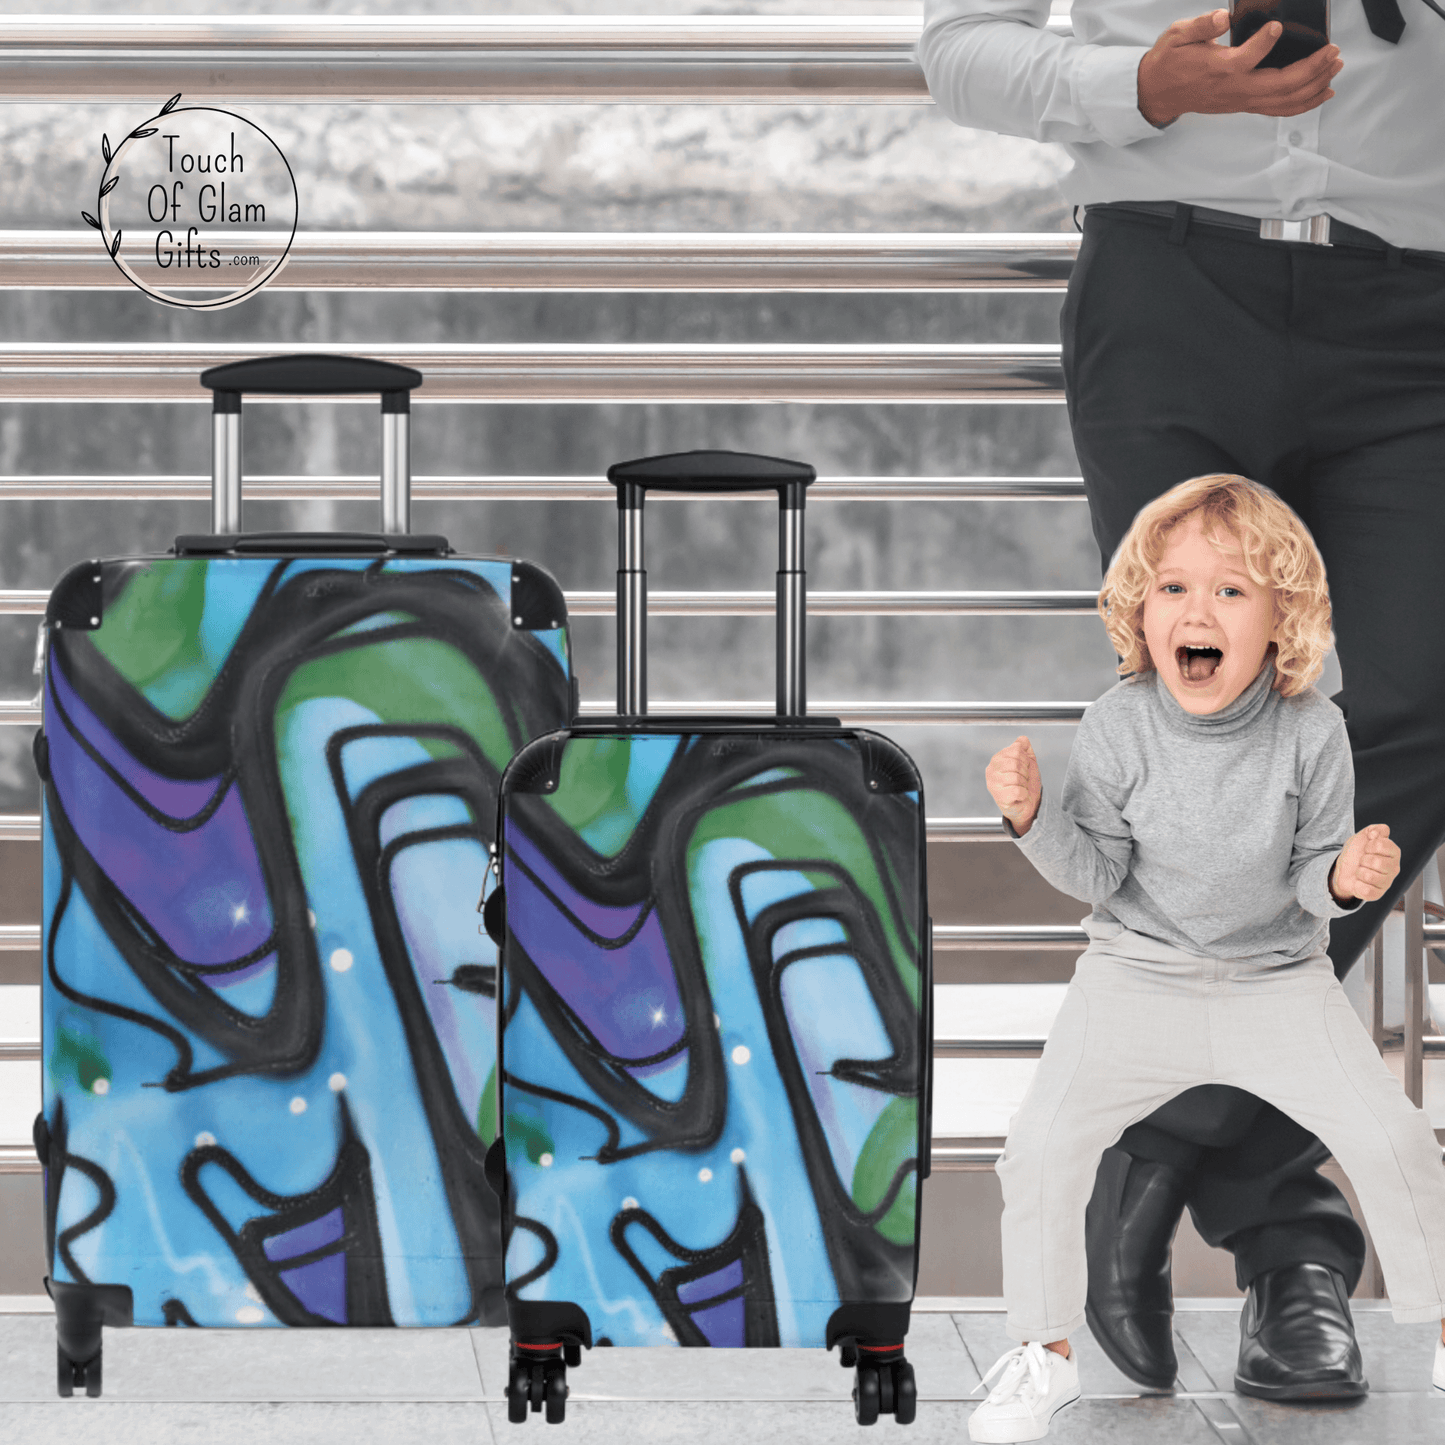 A boy is excited about his cool blue luggage with a graffiti design.  He has the medium size suitcase with wheels and small carry on suitcase.